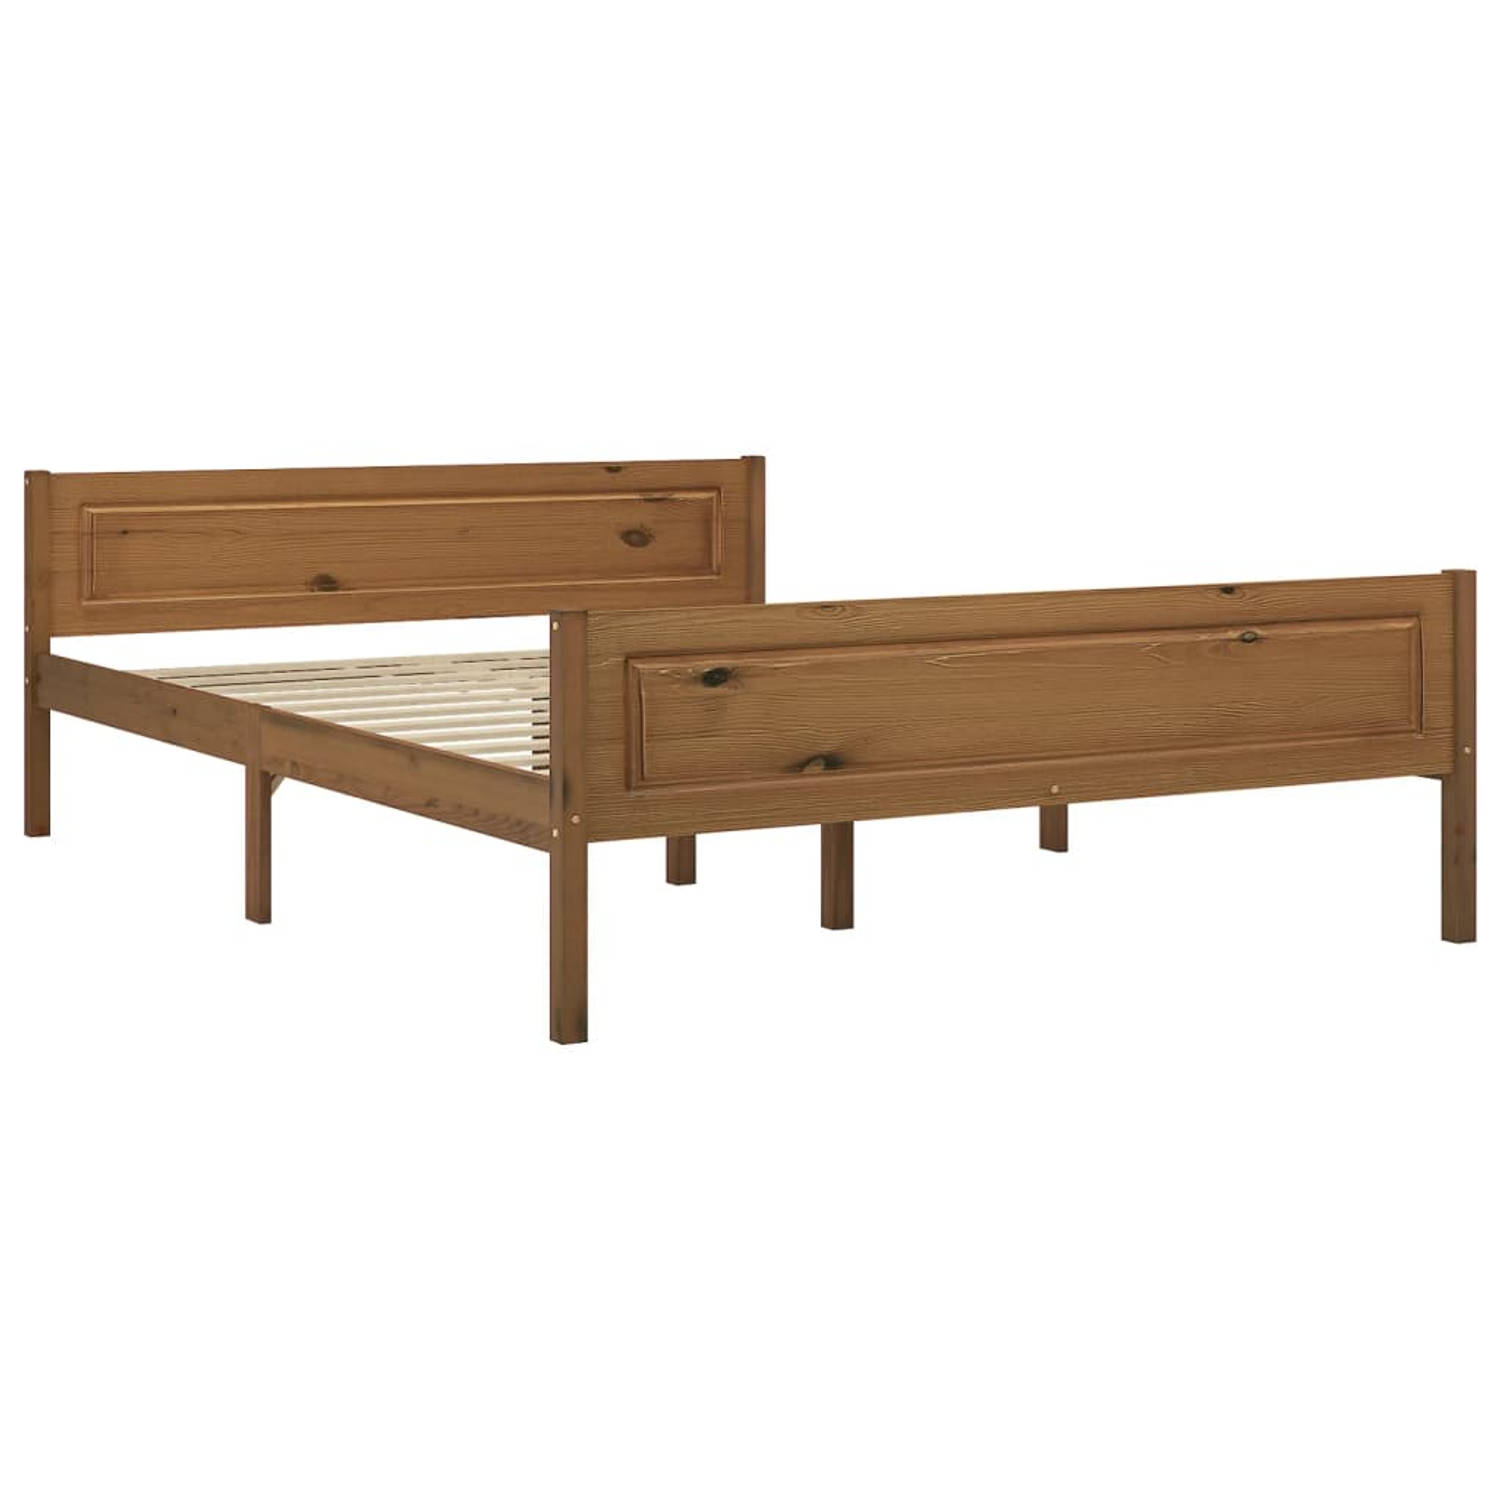 The Living Store Bedframe massief grenenhout honingbruin 160x200 cm - Bedframe - Bedframe - Bed Frame - Bed Frames - Bed - Bedden - 2-persoonsbed - 2-persoonsbedden - Tweepersoons